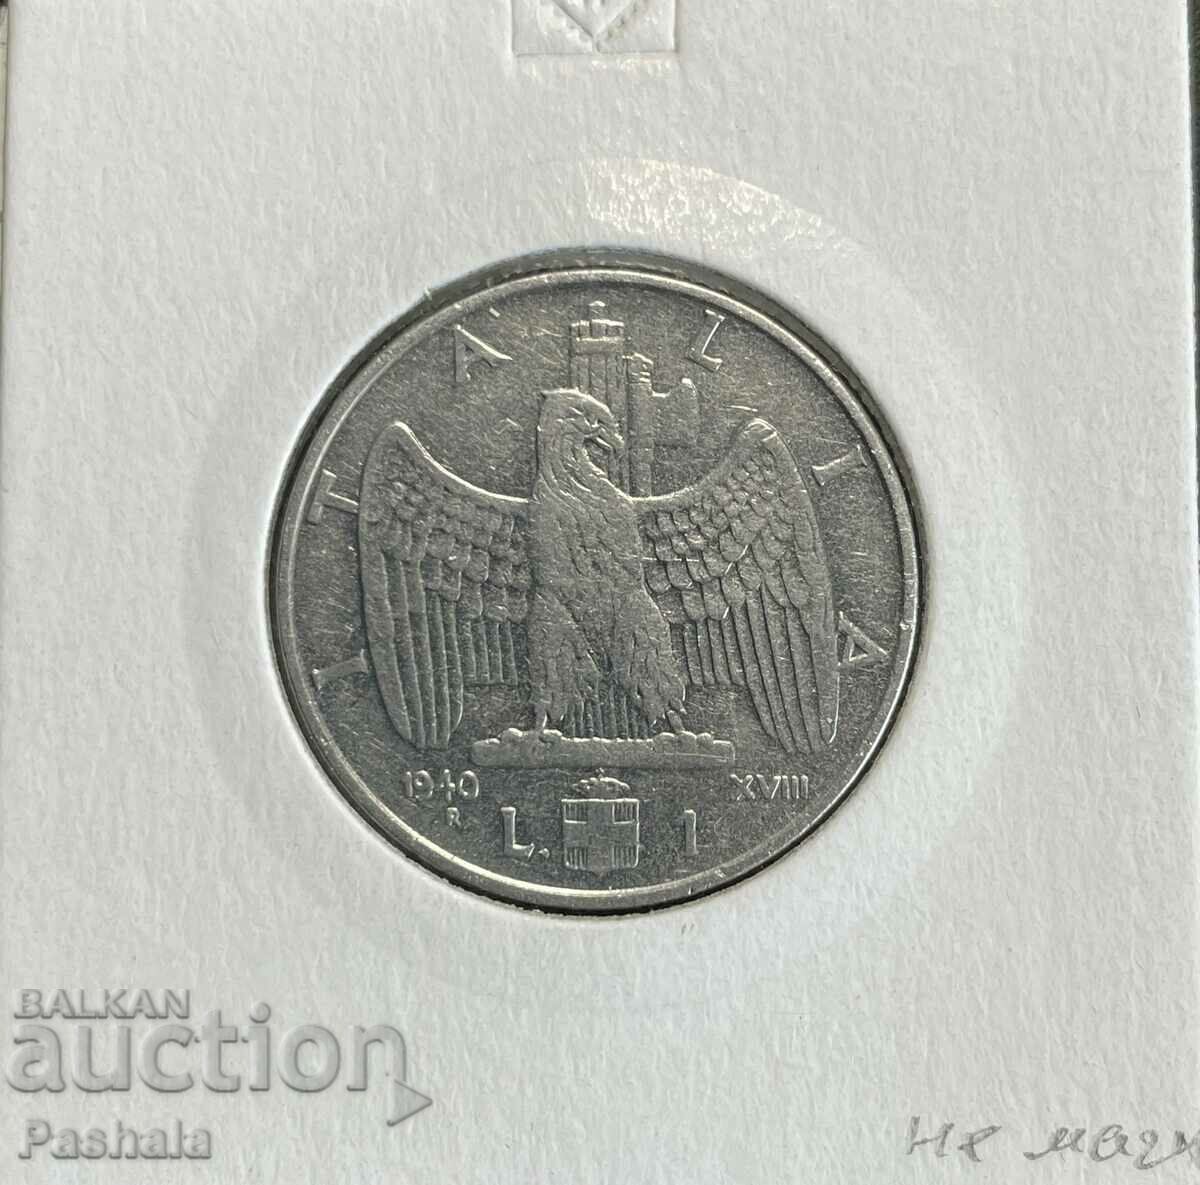 Italy 1 Lire 1940 is not magnetic